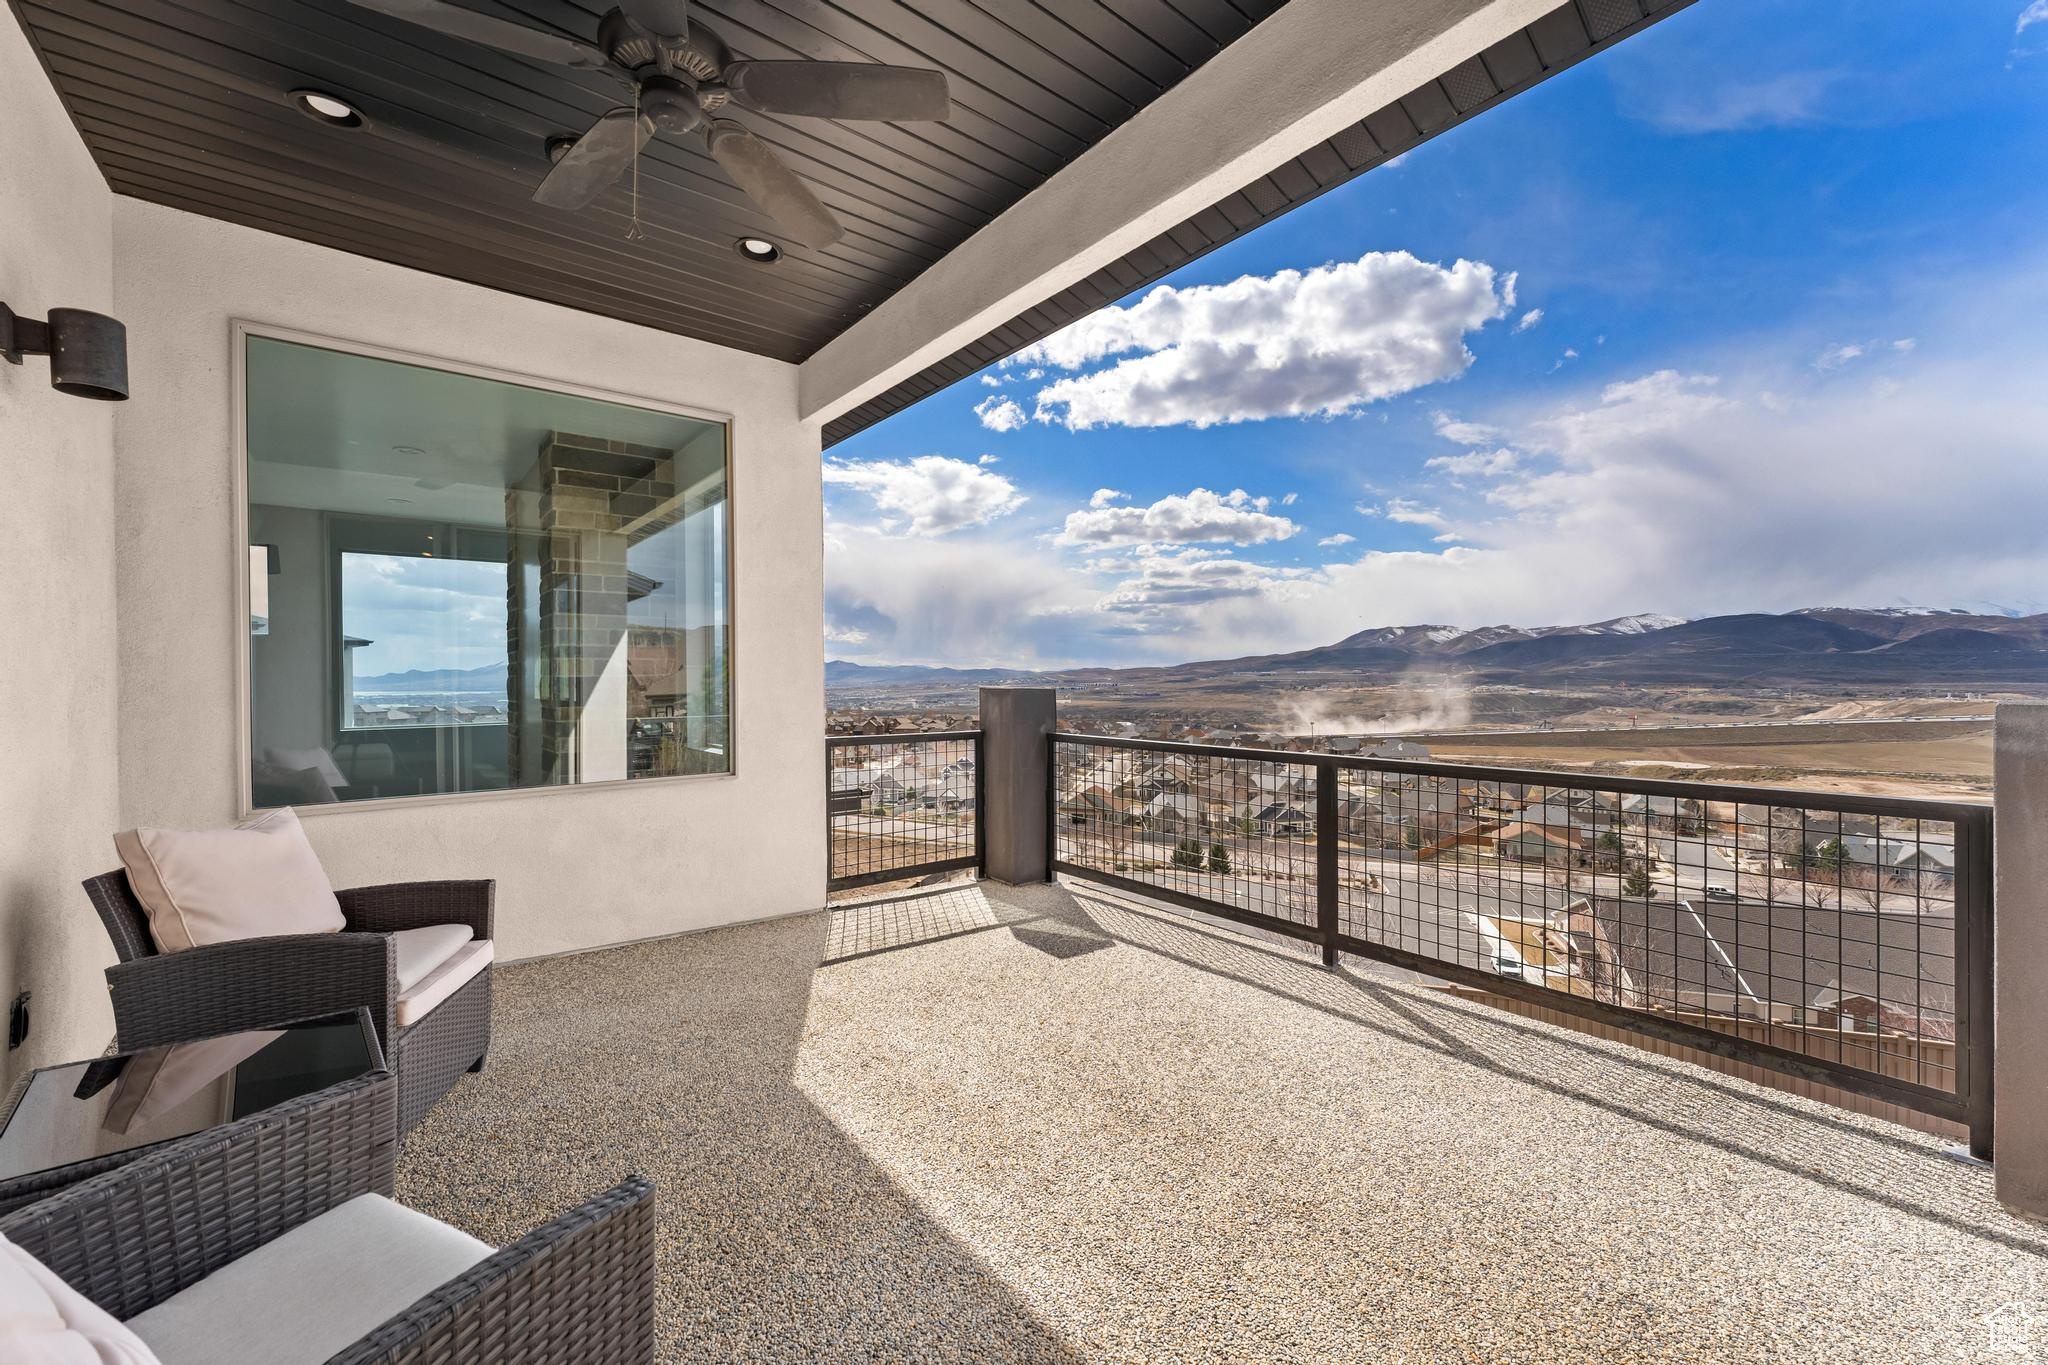 Balcony with a mountain view and ceiling fan